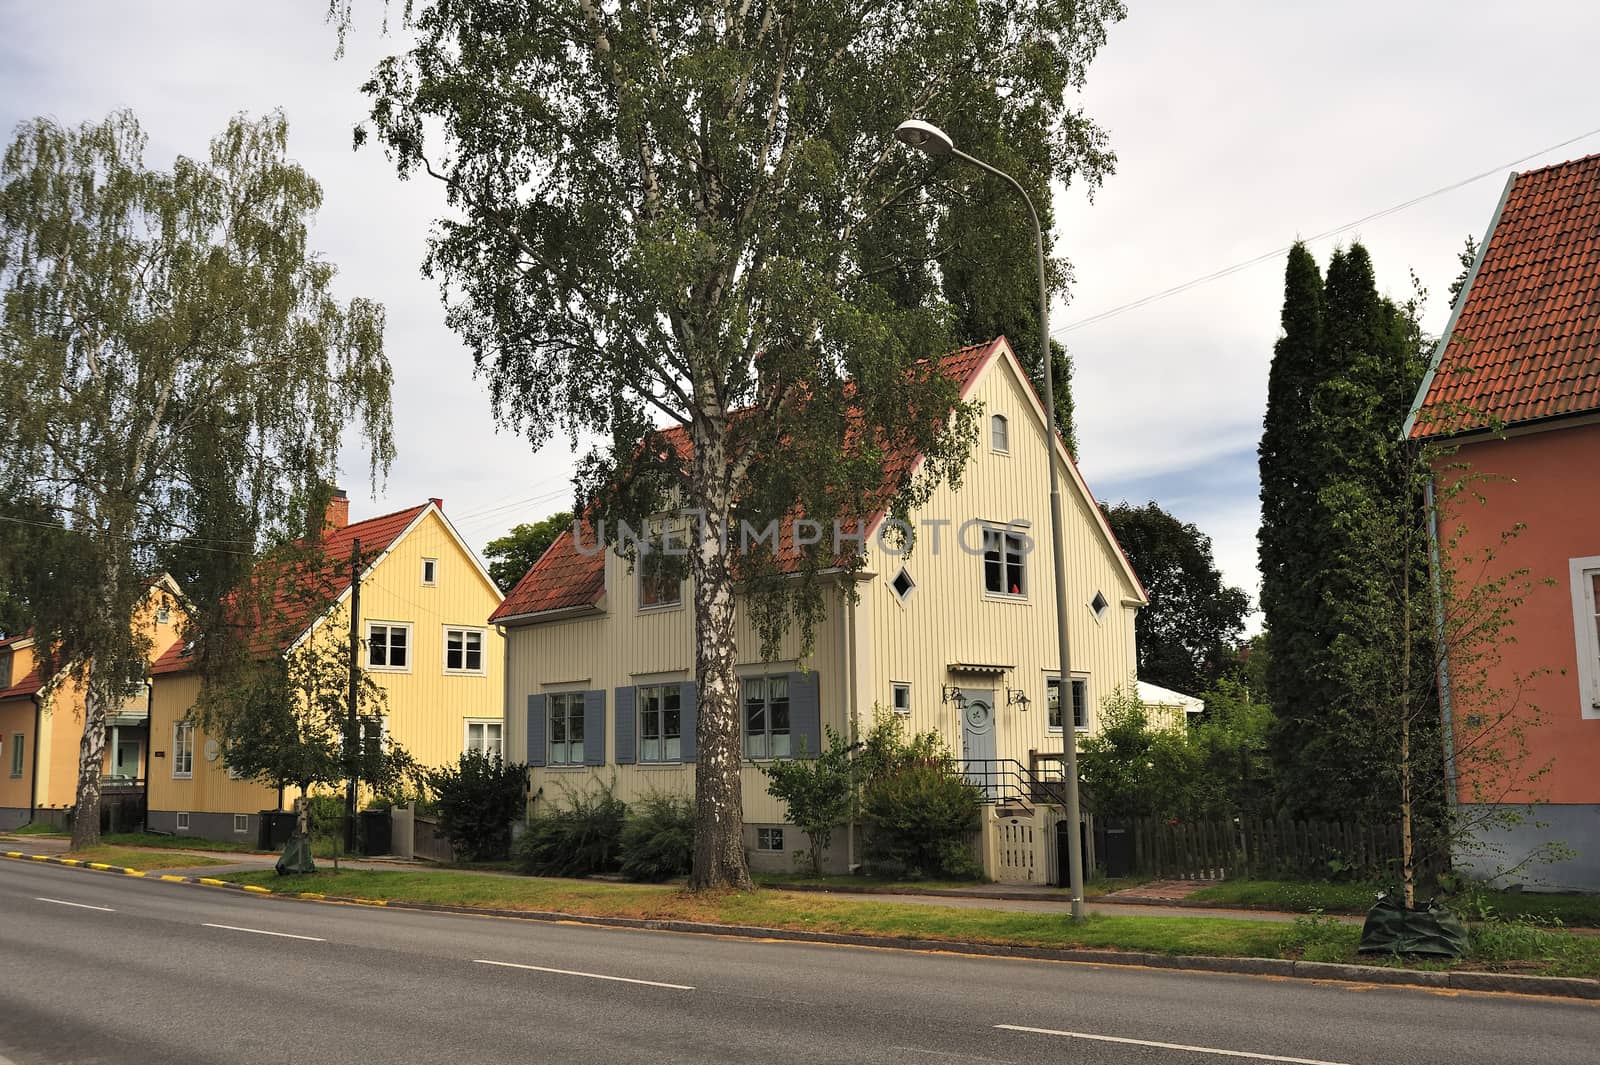 Swedish housing in Stockholm area. by a40757